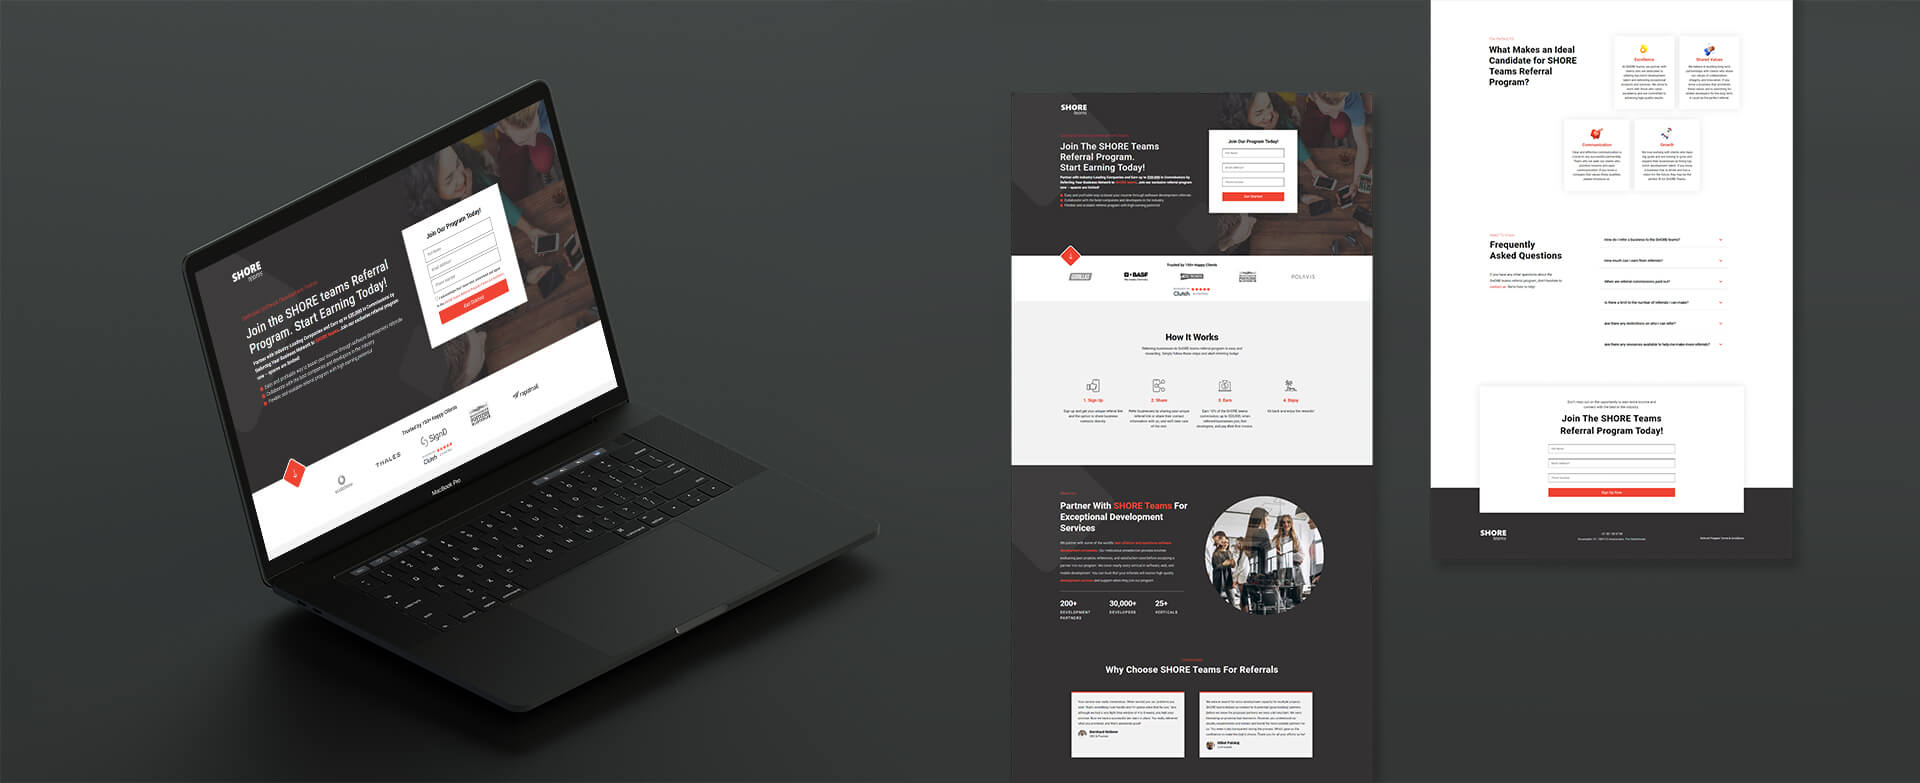 Full view of referral marketing program landing page design by Nar Agency.